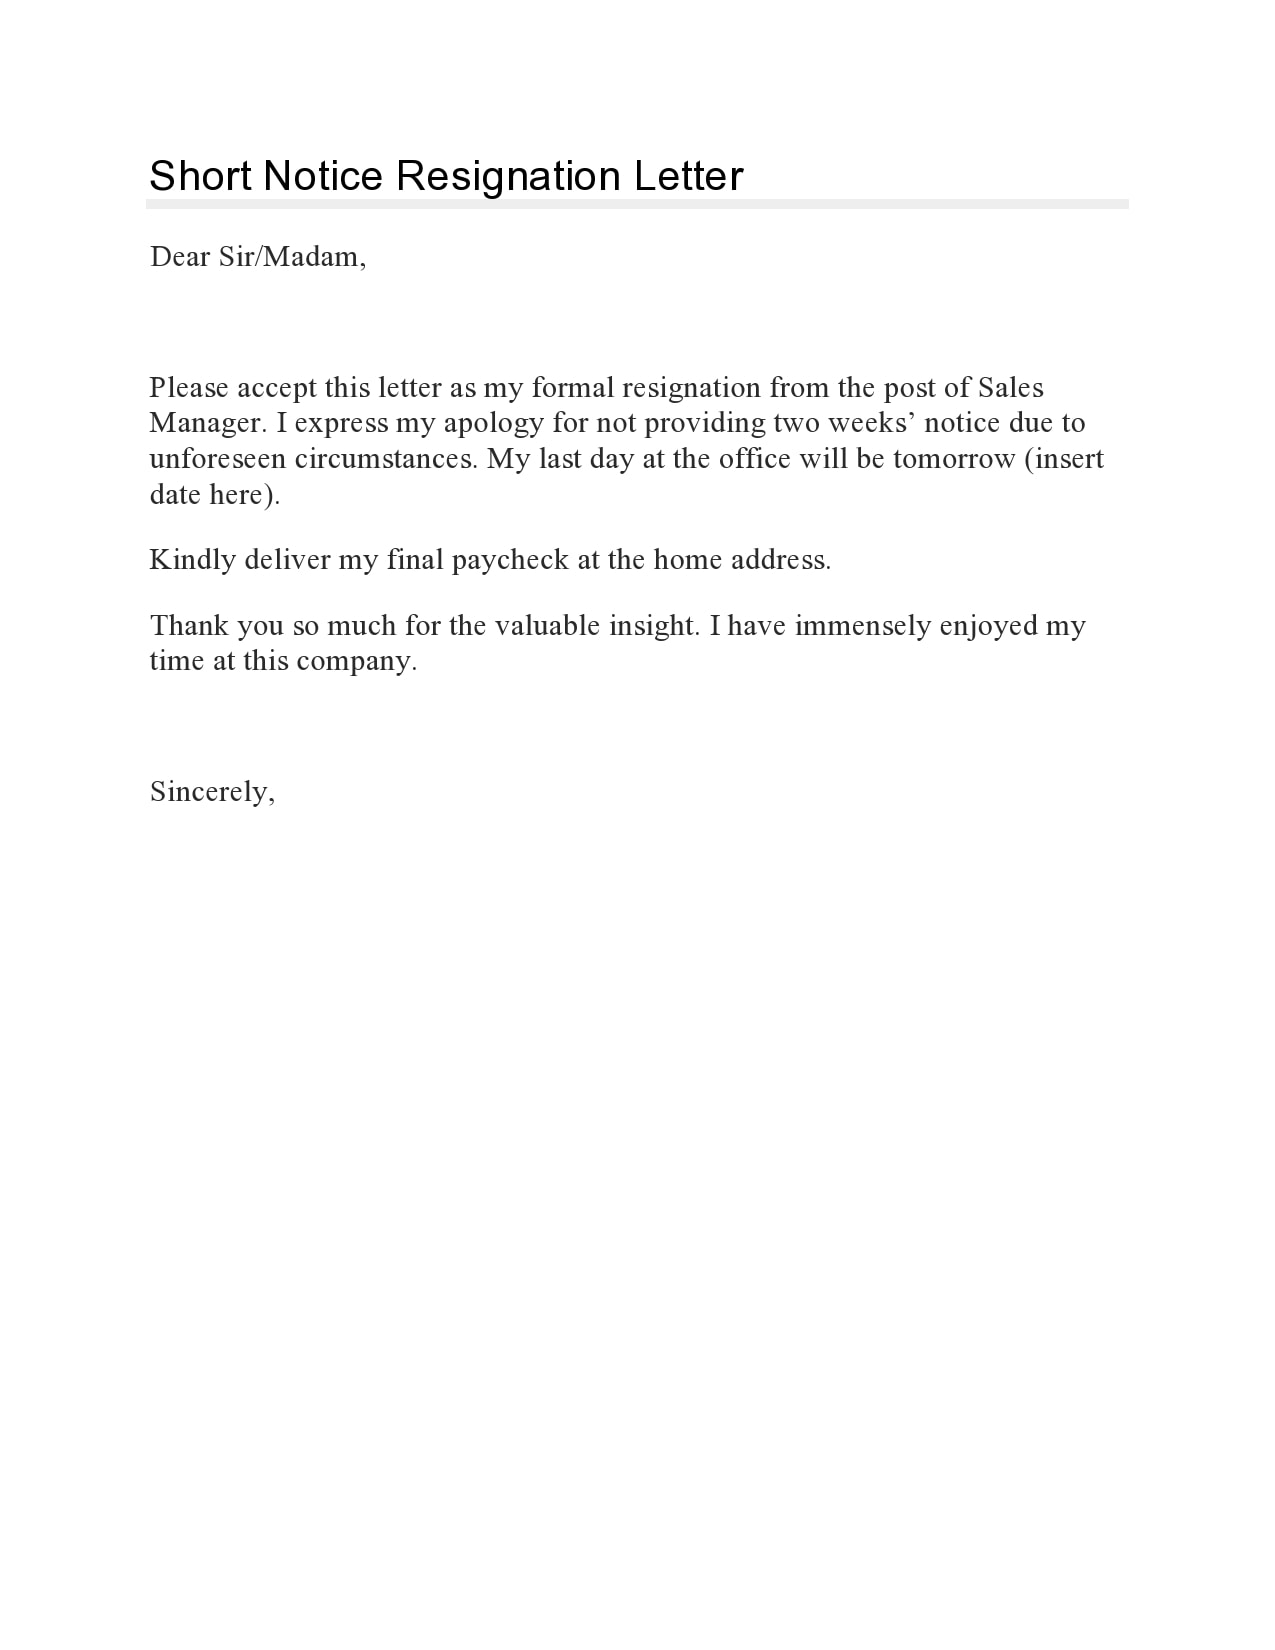 24+ Short Notice Resignation Letters (FREE) - TemplateArchive In Two Week Notice Template Word